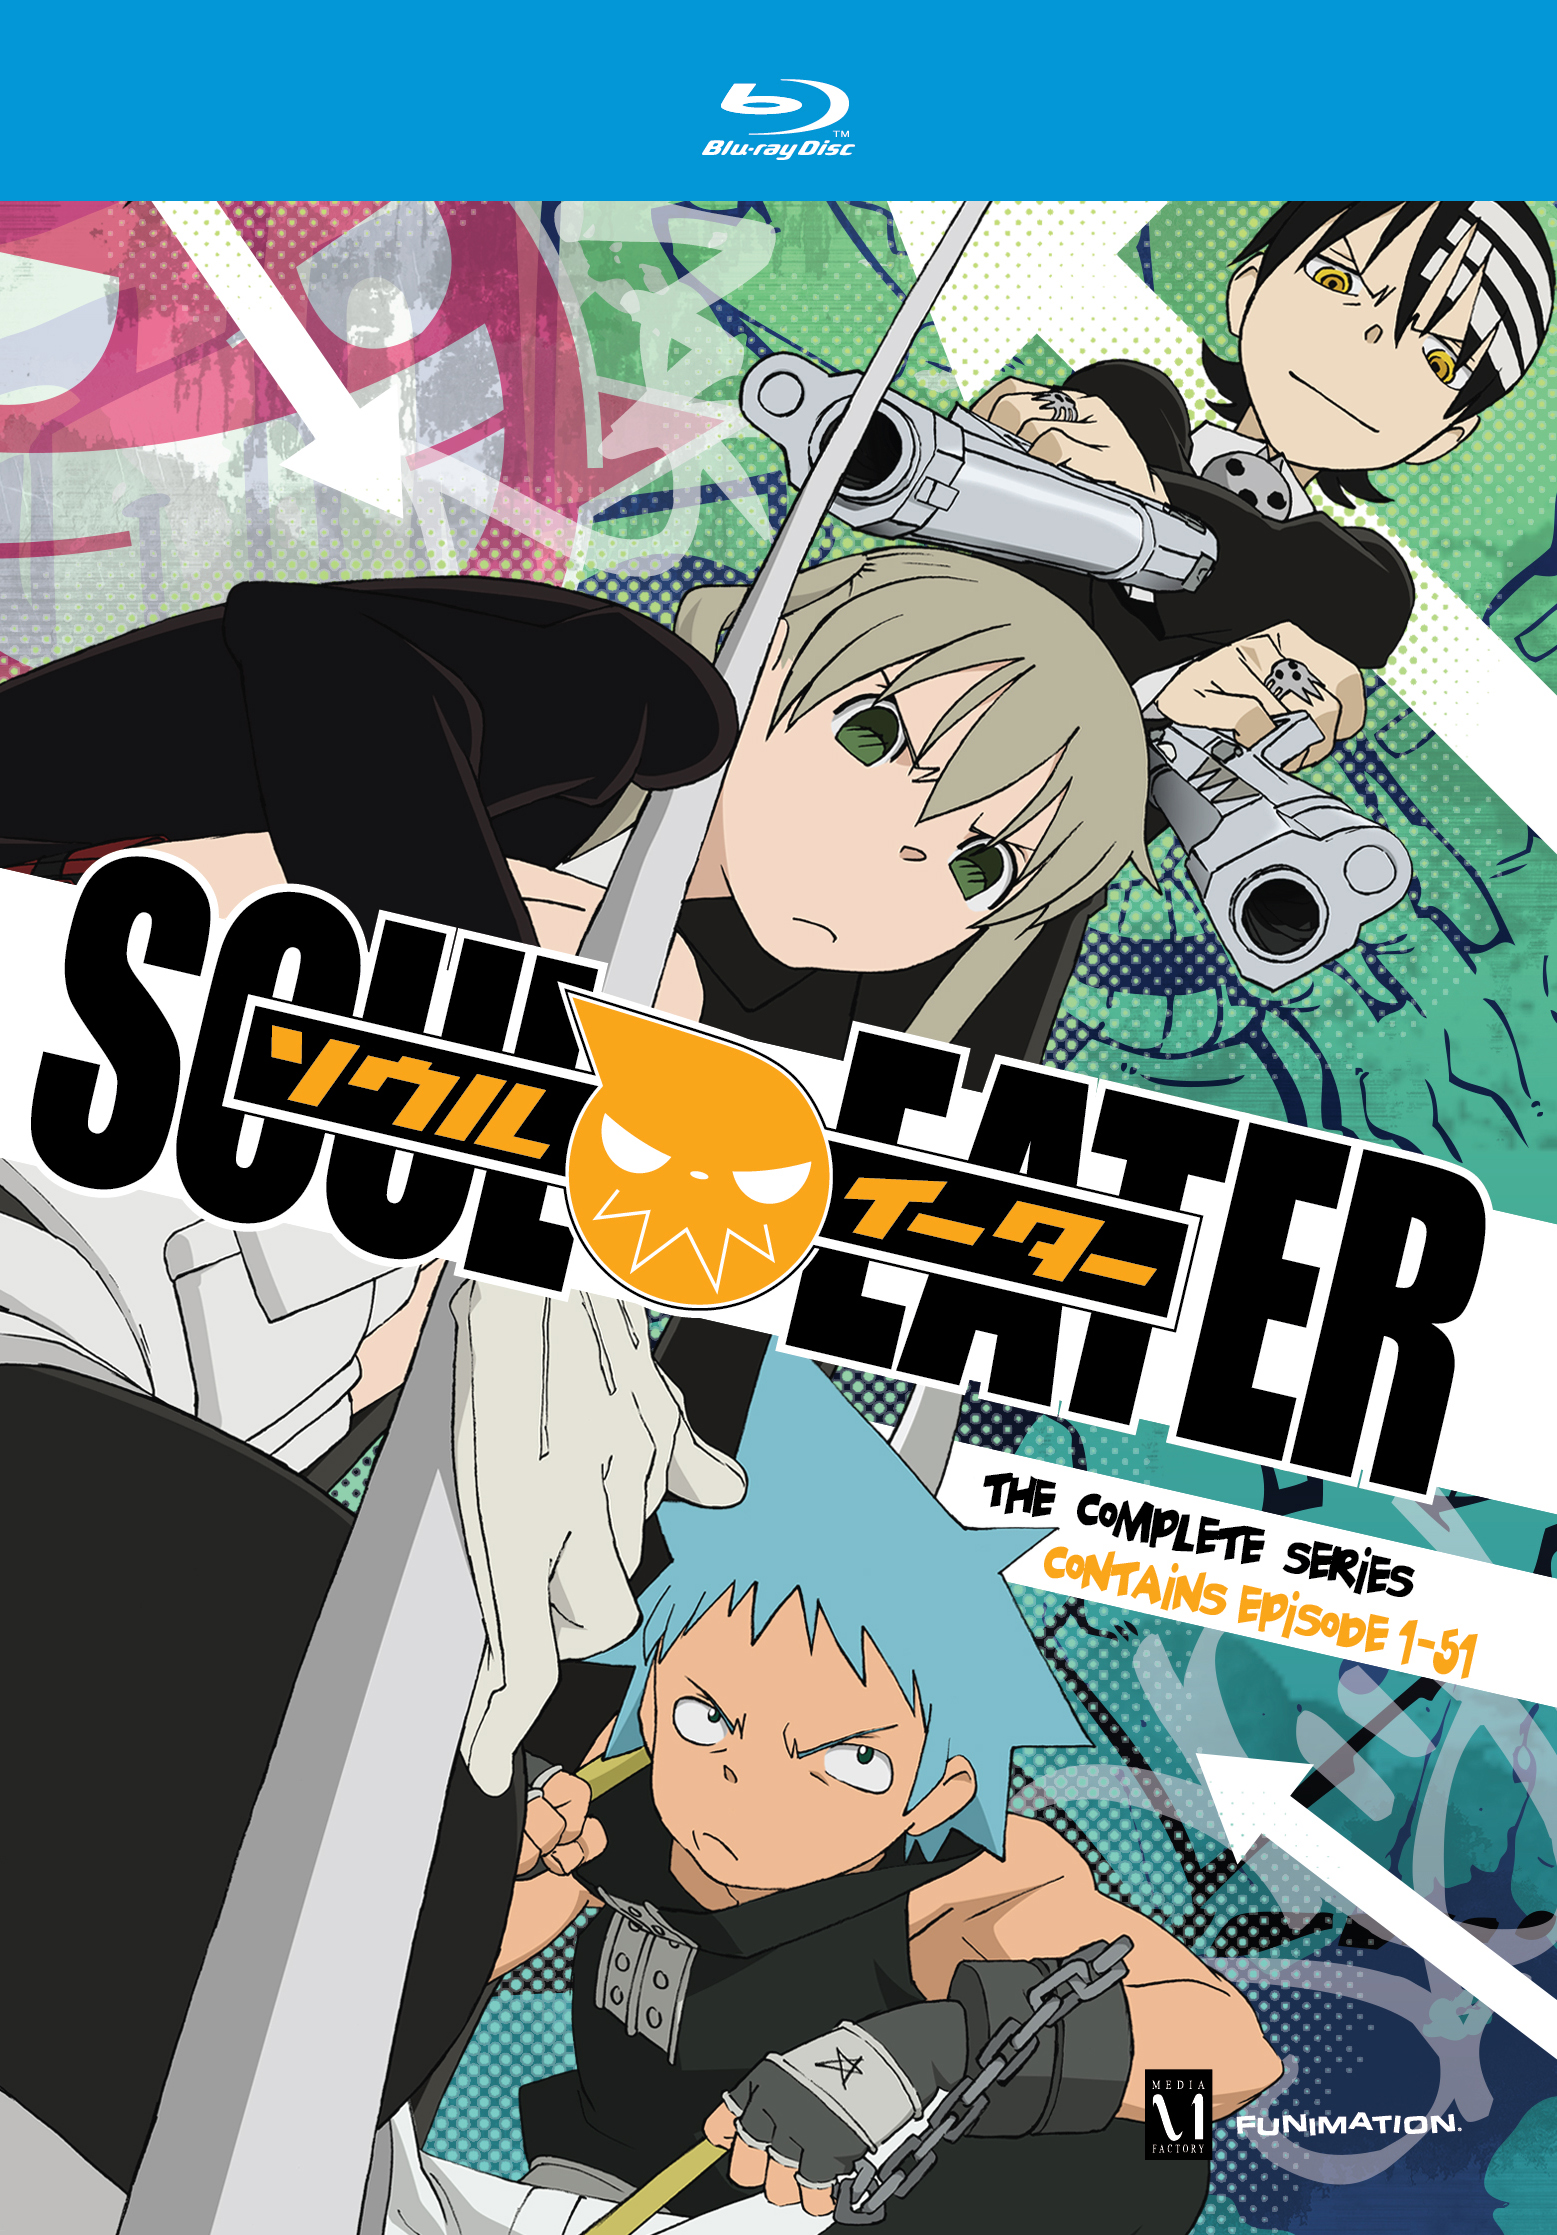 Soul Eater  Watch on Funimation